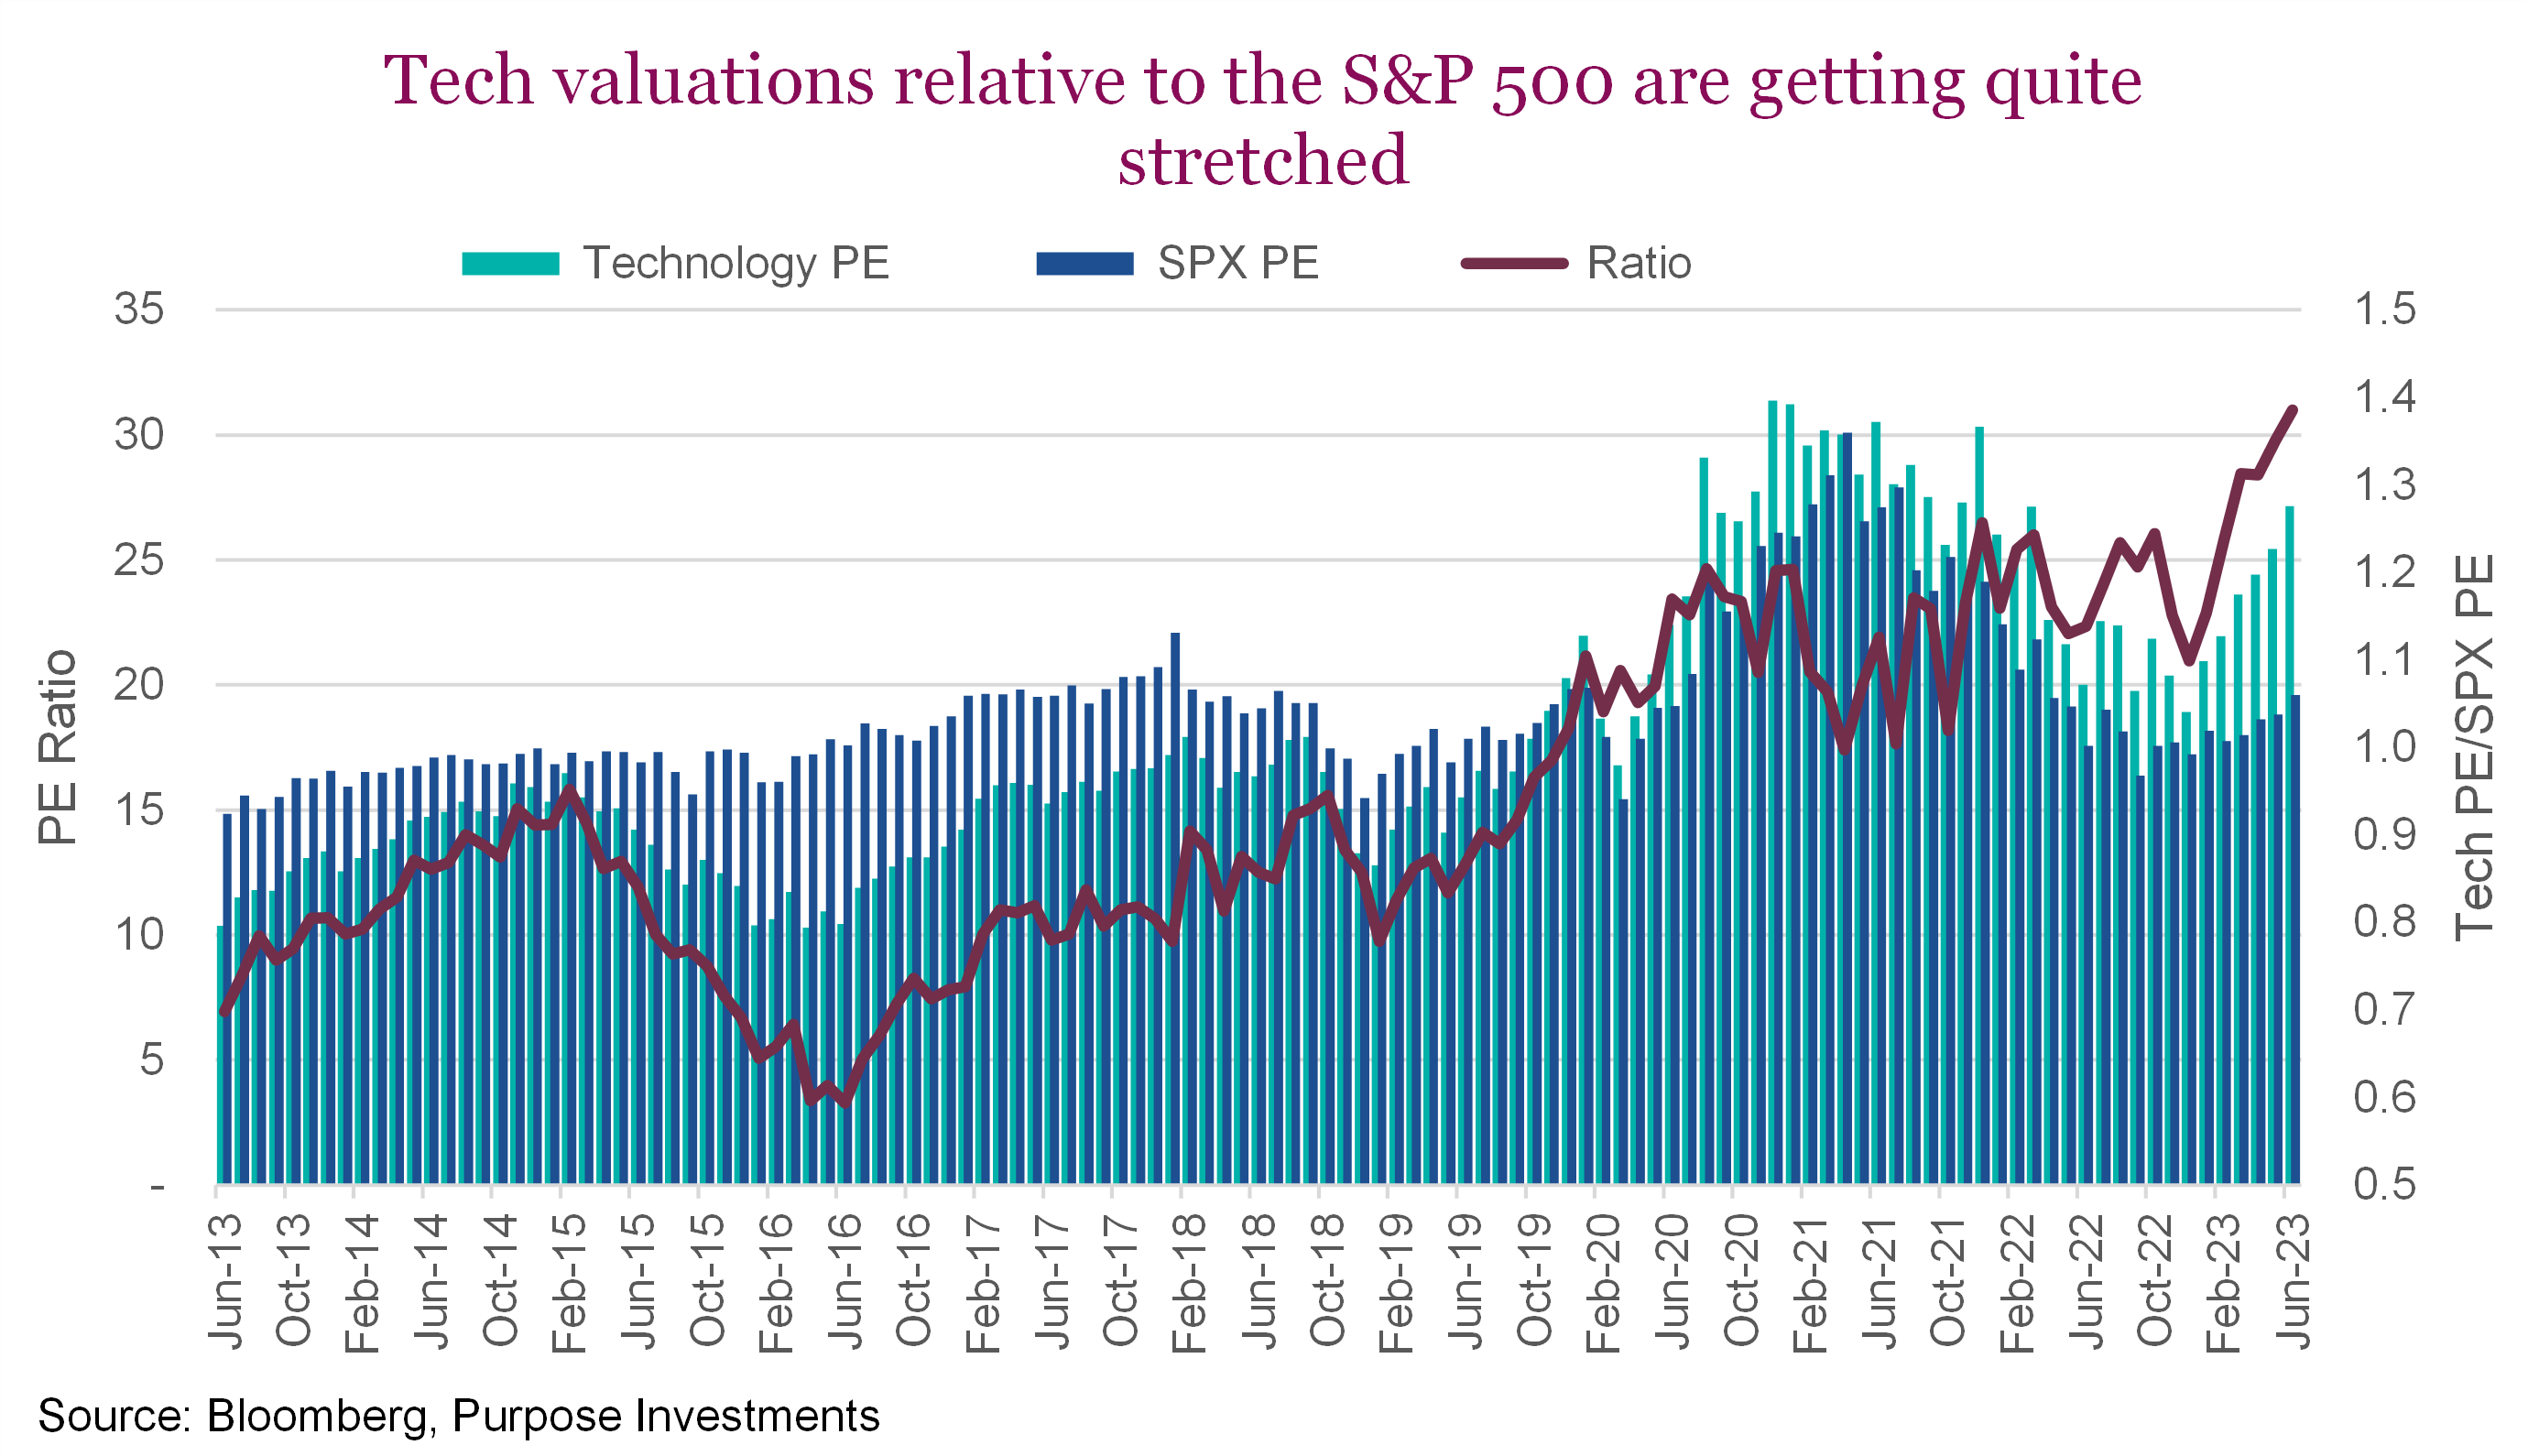 Tech valuations relative to the S&P 500 are getting quite stretched
